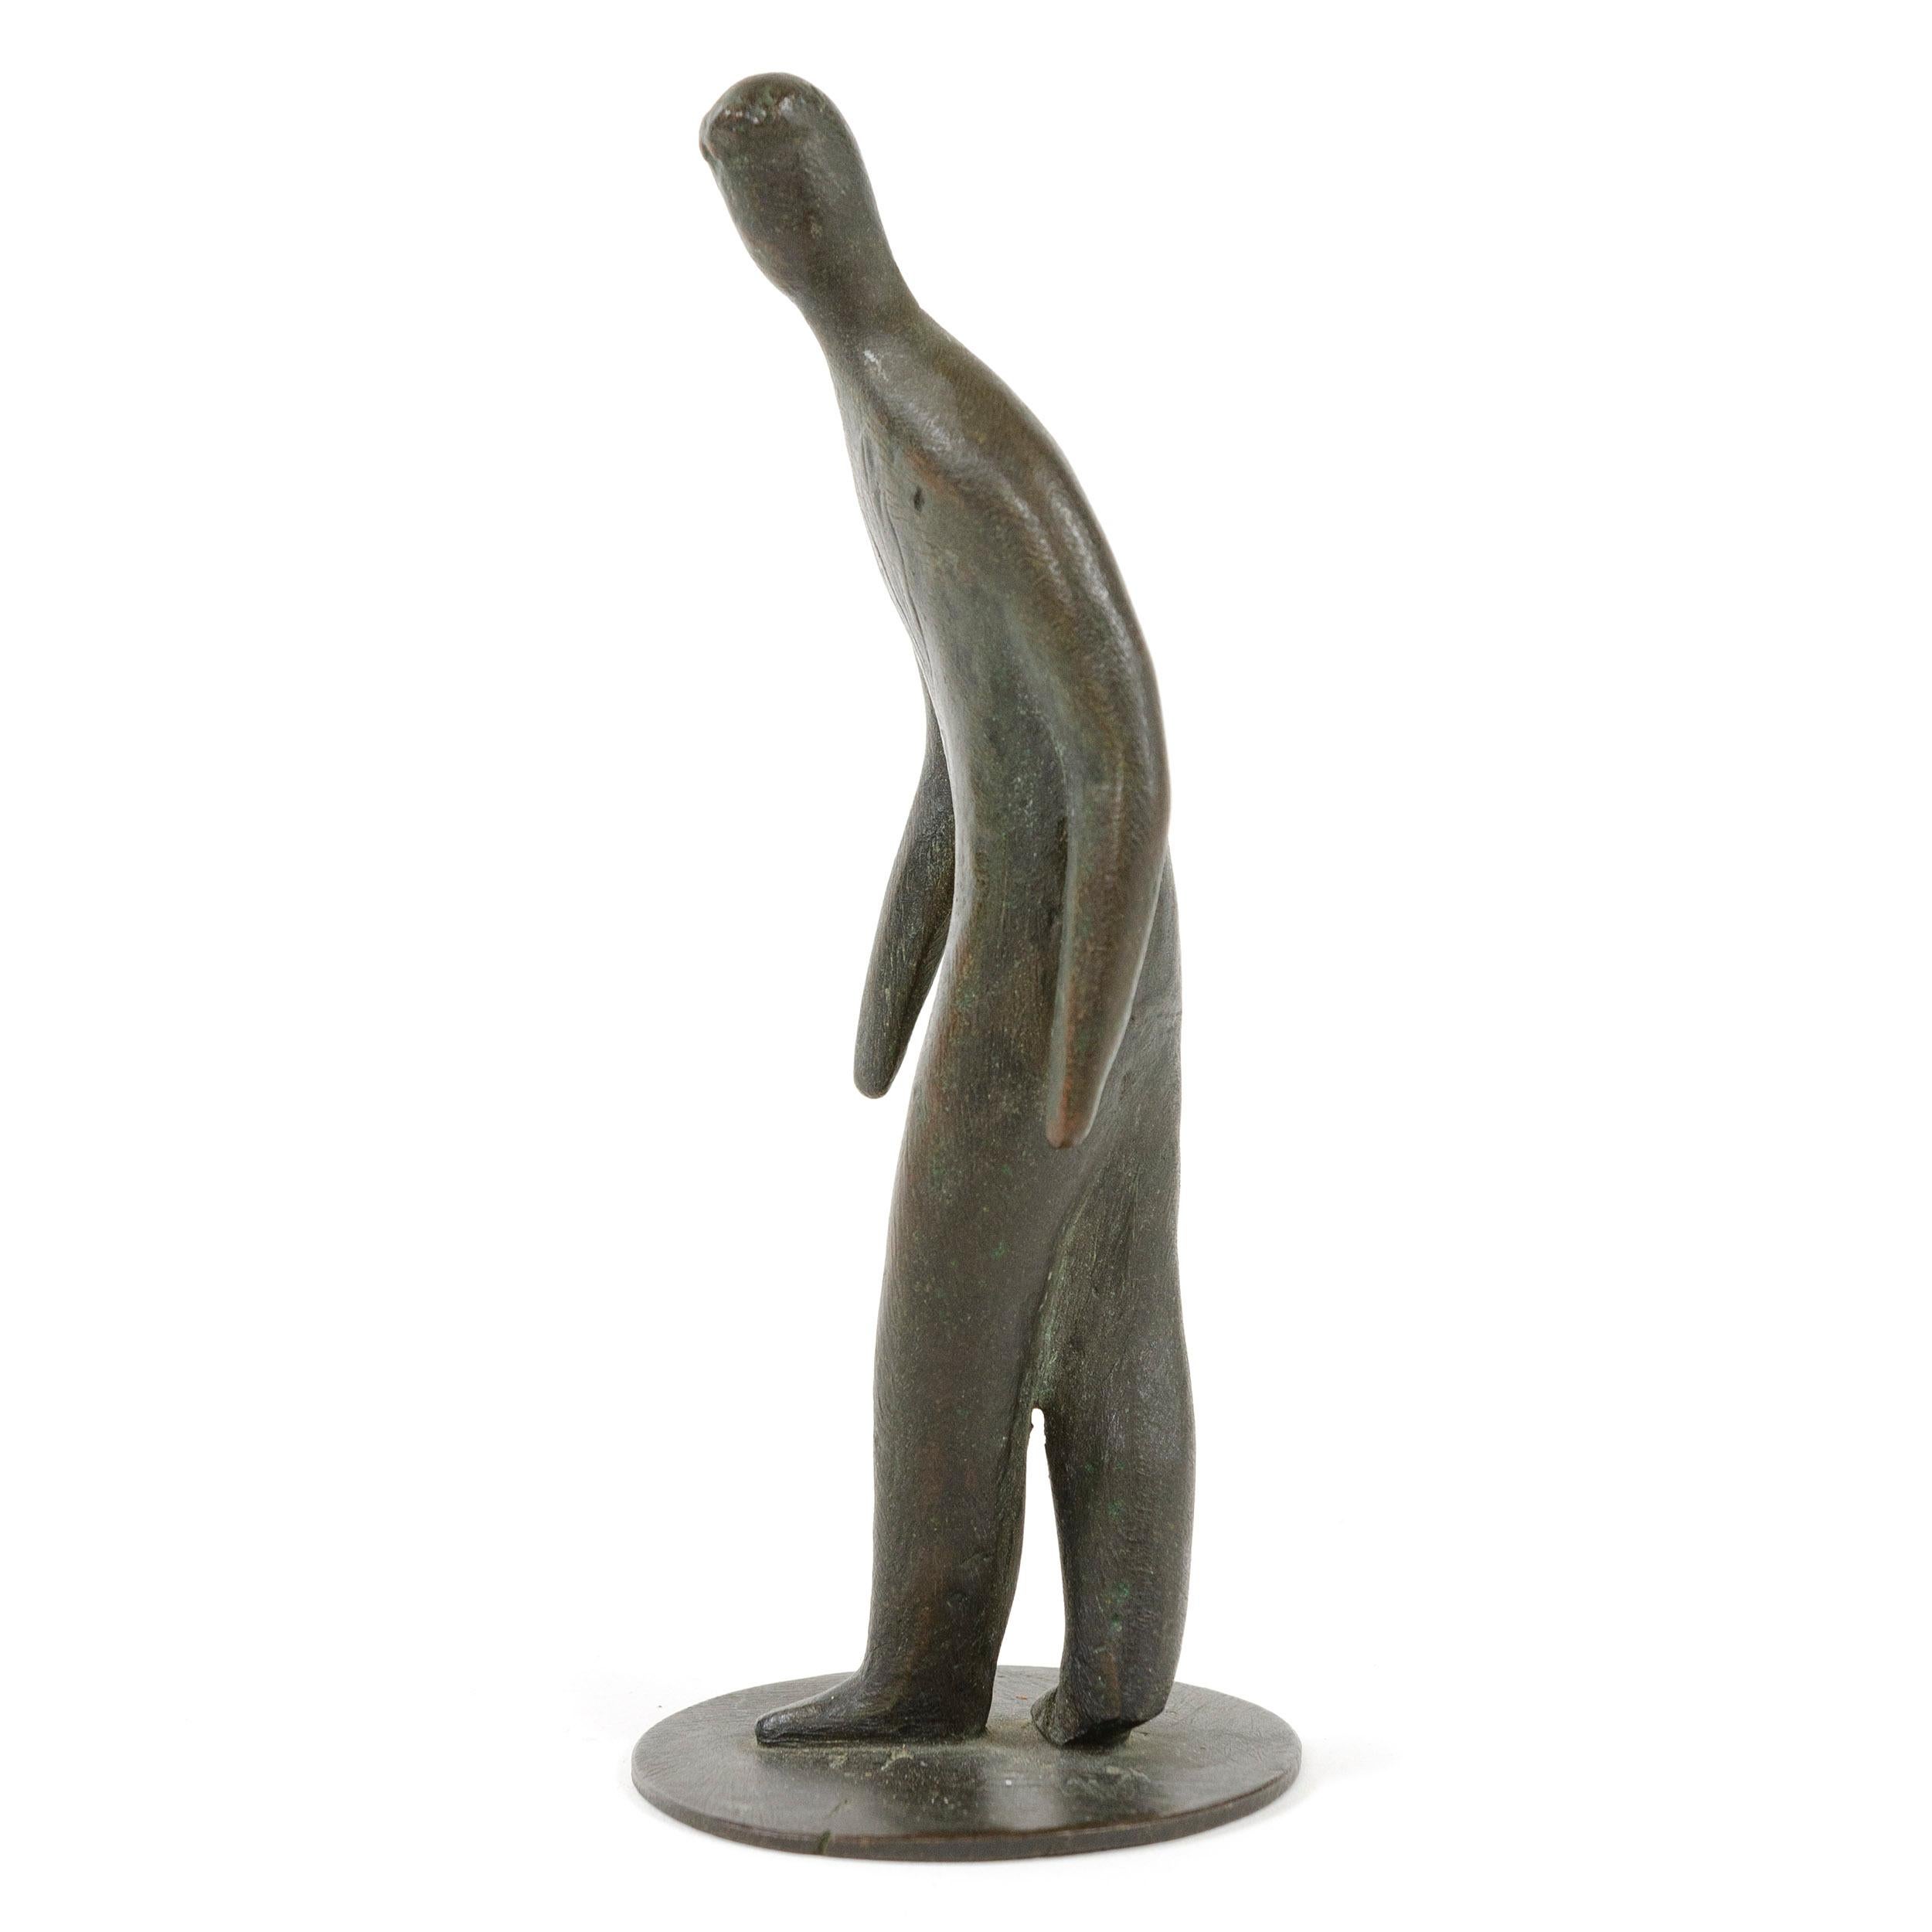 An uncommon Mid-Century Modern brass figure of a gentleman in mid-step.
Designed and Manufactured in Austria by Carl Auböck, 1930s.